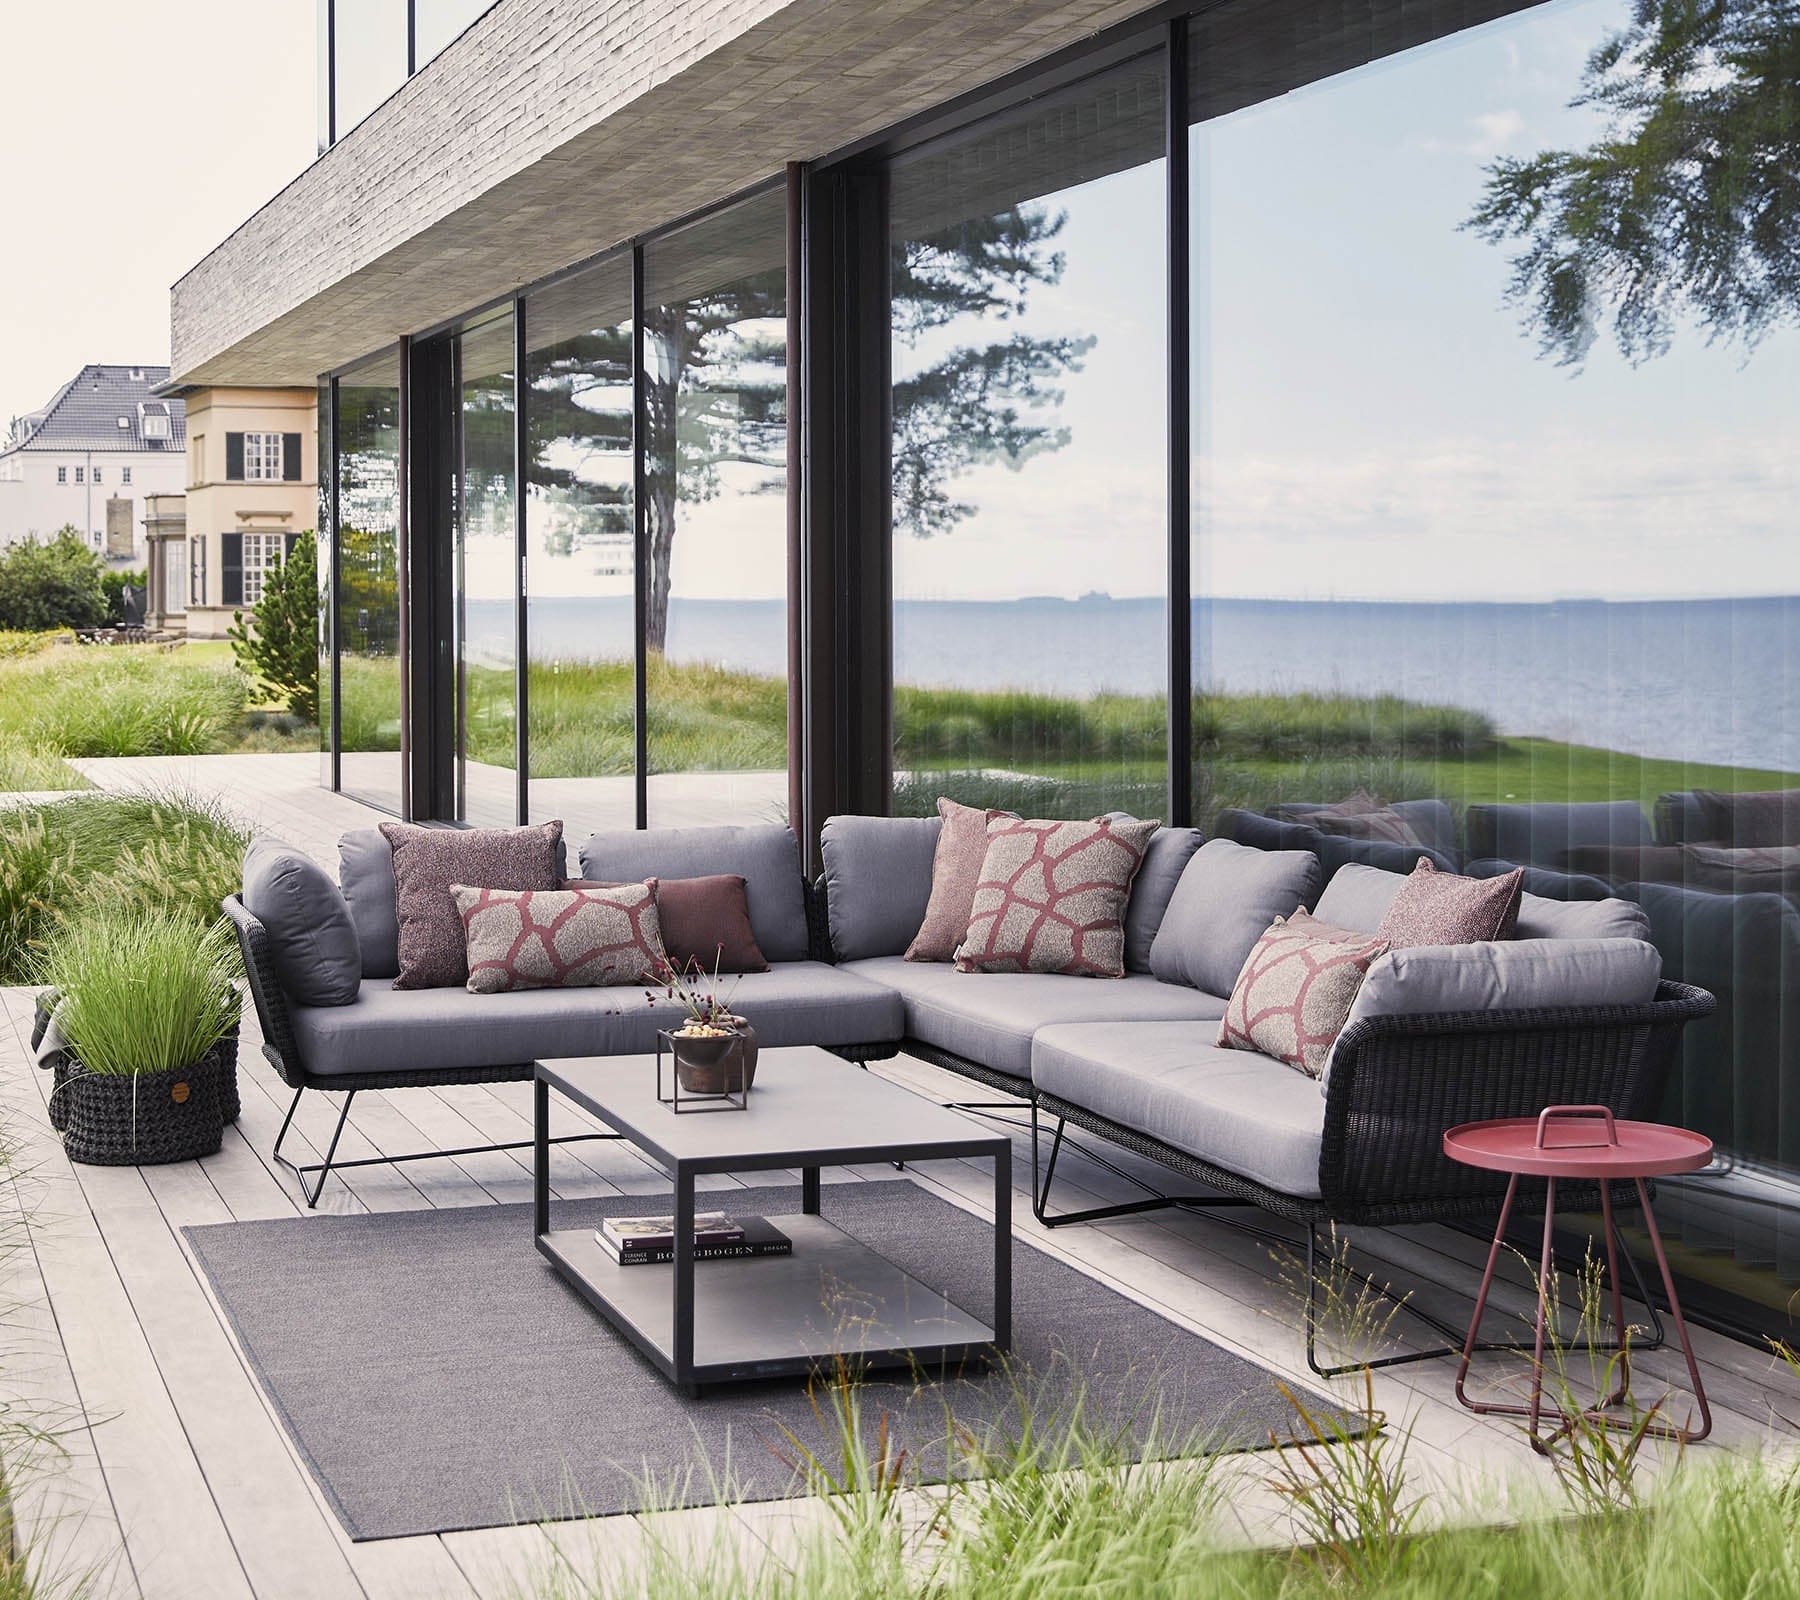 Boxhill's Horizon 2-Seater Outdoor Right Module Sofa lifestyle image together with Horizon 2-Seater Outdoor Left Module Sofa beside glass wall at patio, with a rectangular table at the center and small round side table at the side